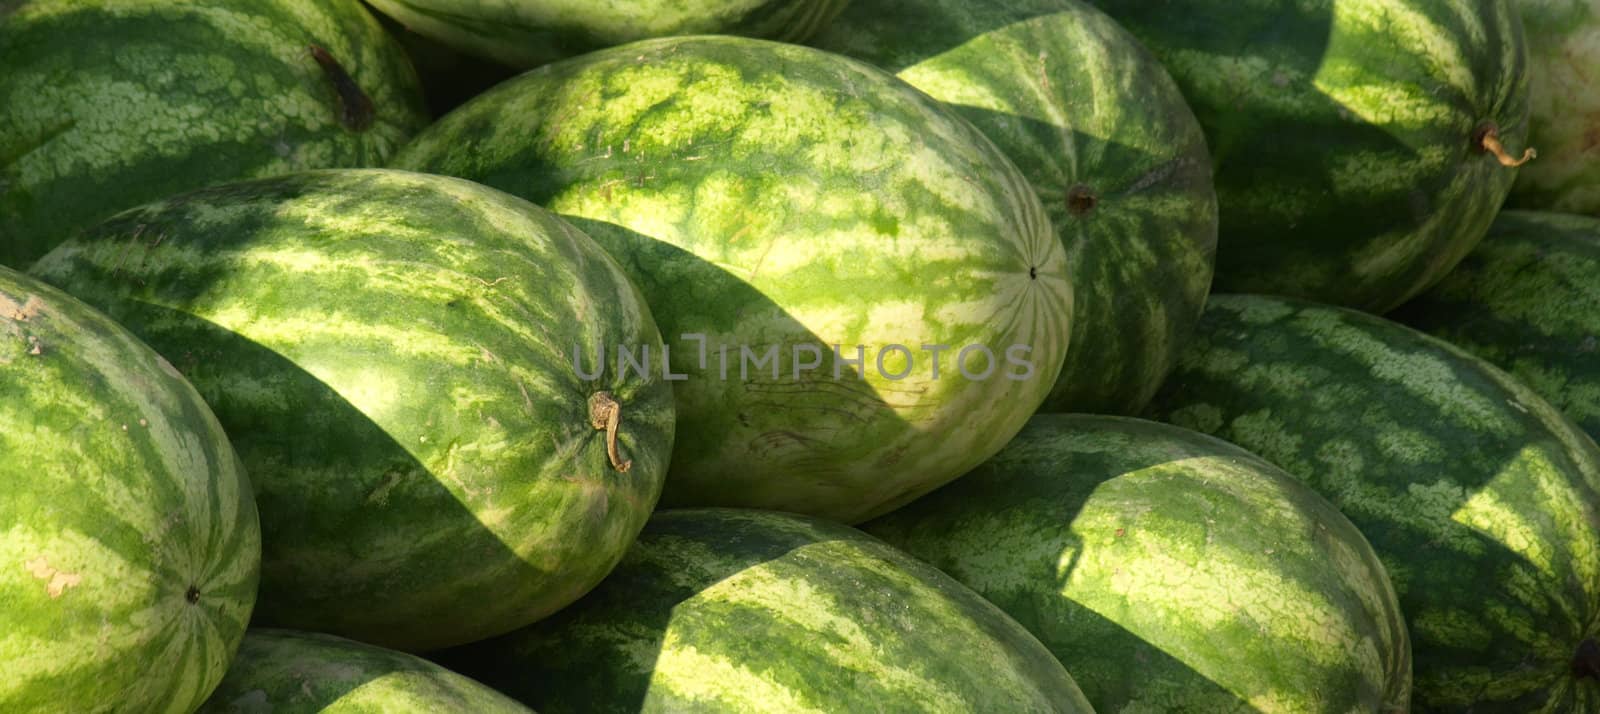 Watermelon for sale at the market during the summer